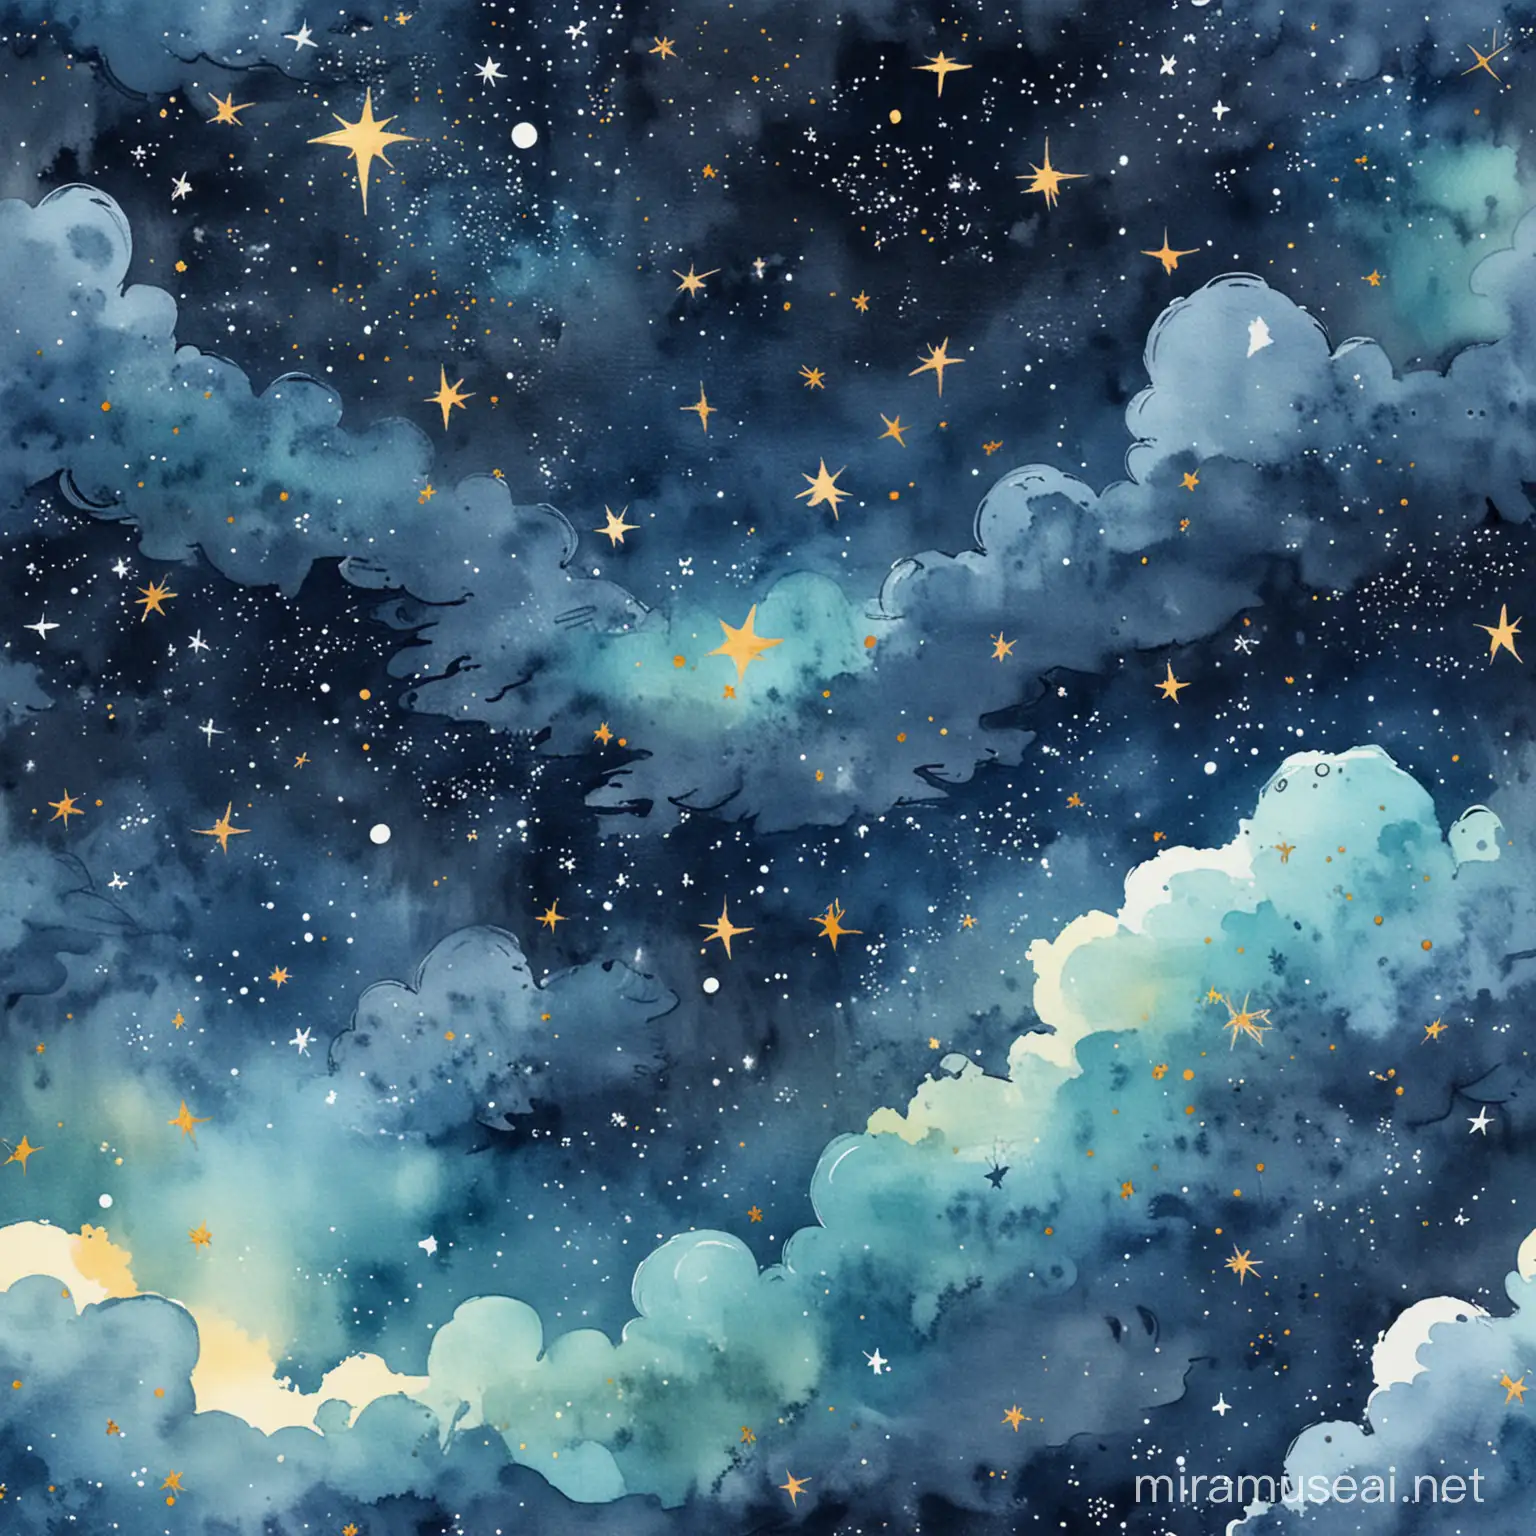 Whimsical Starry Night Sky Watercolor Painting